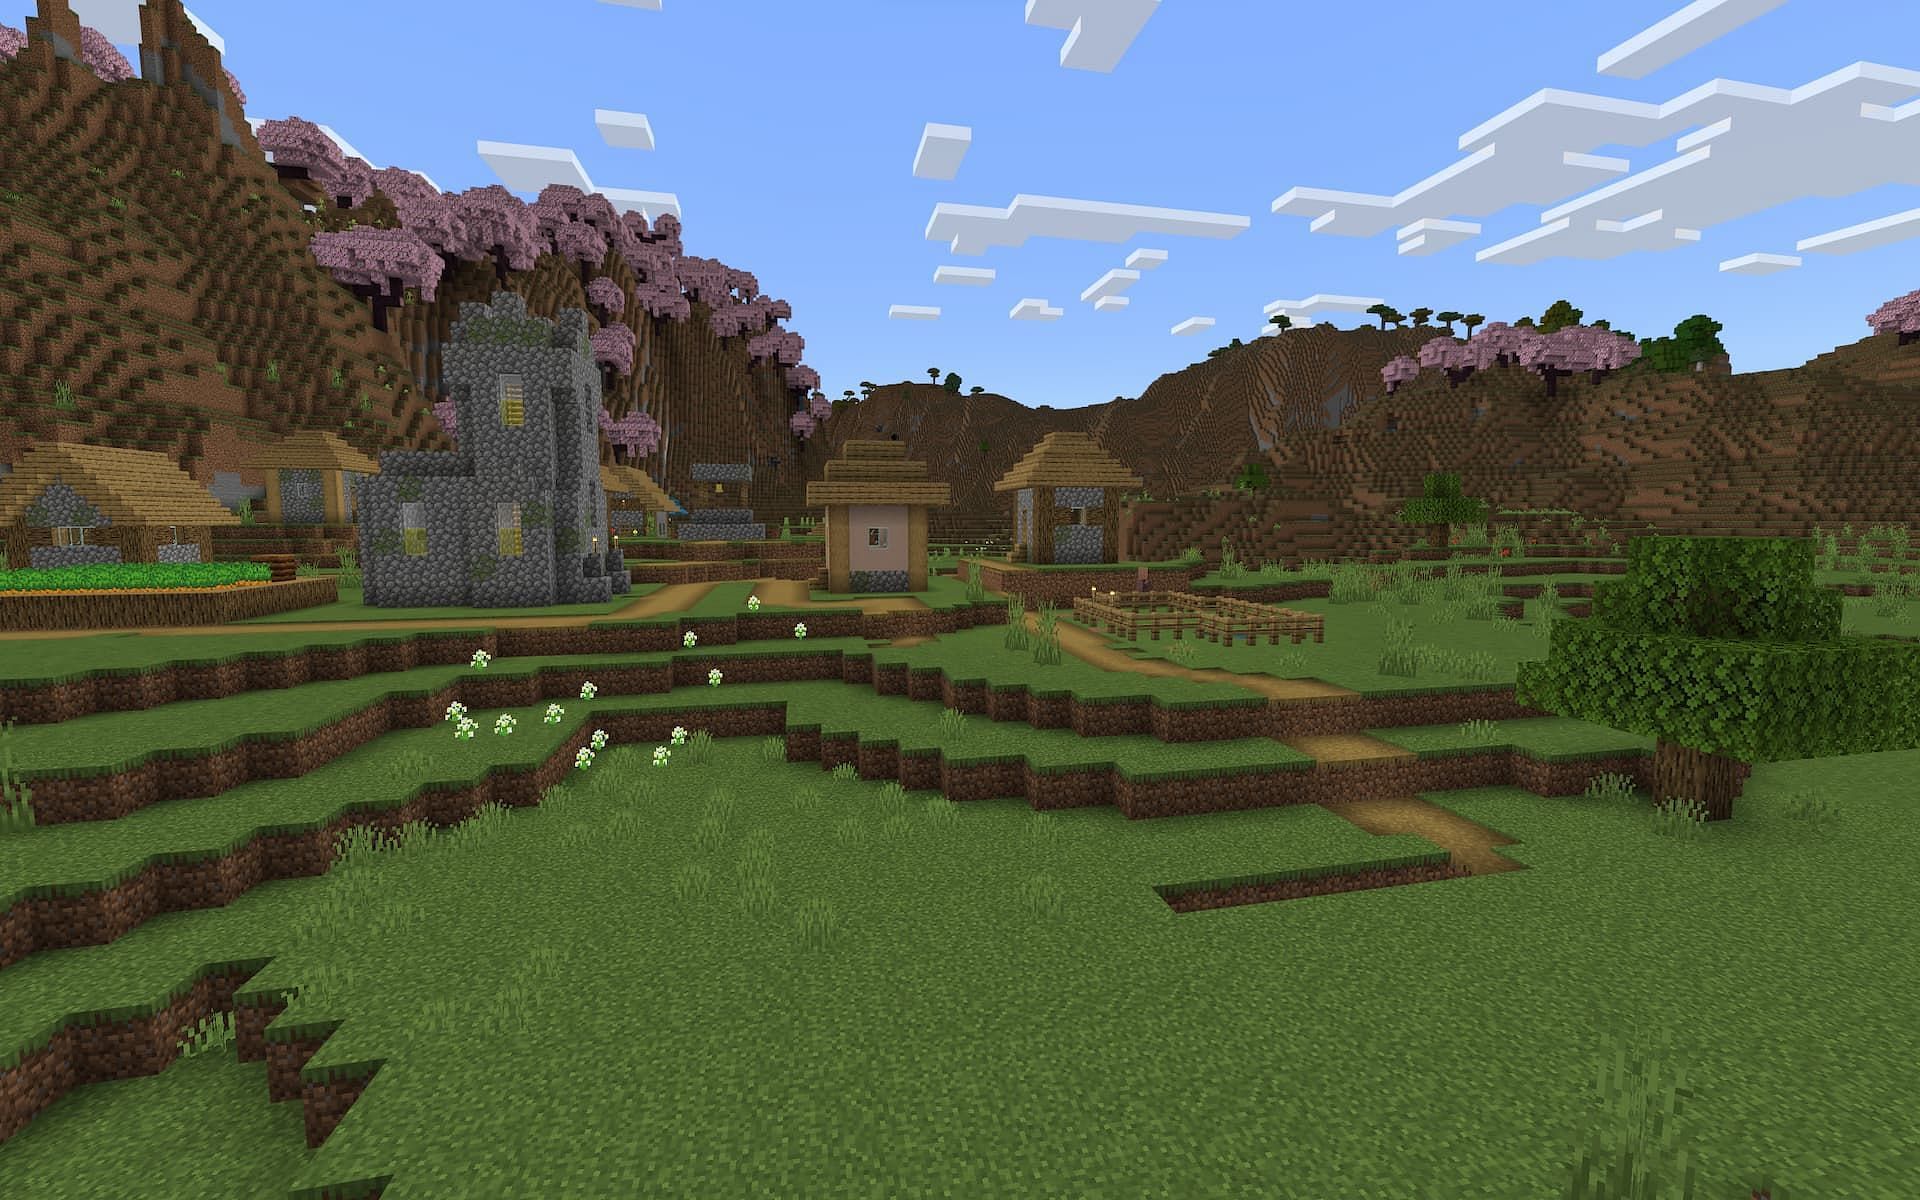 Players can find horses to ride in this breathtaking valley (Image via Mojang)